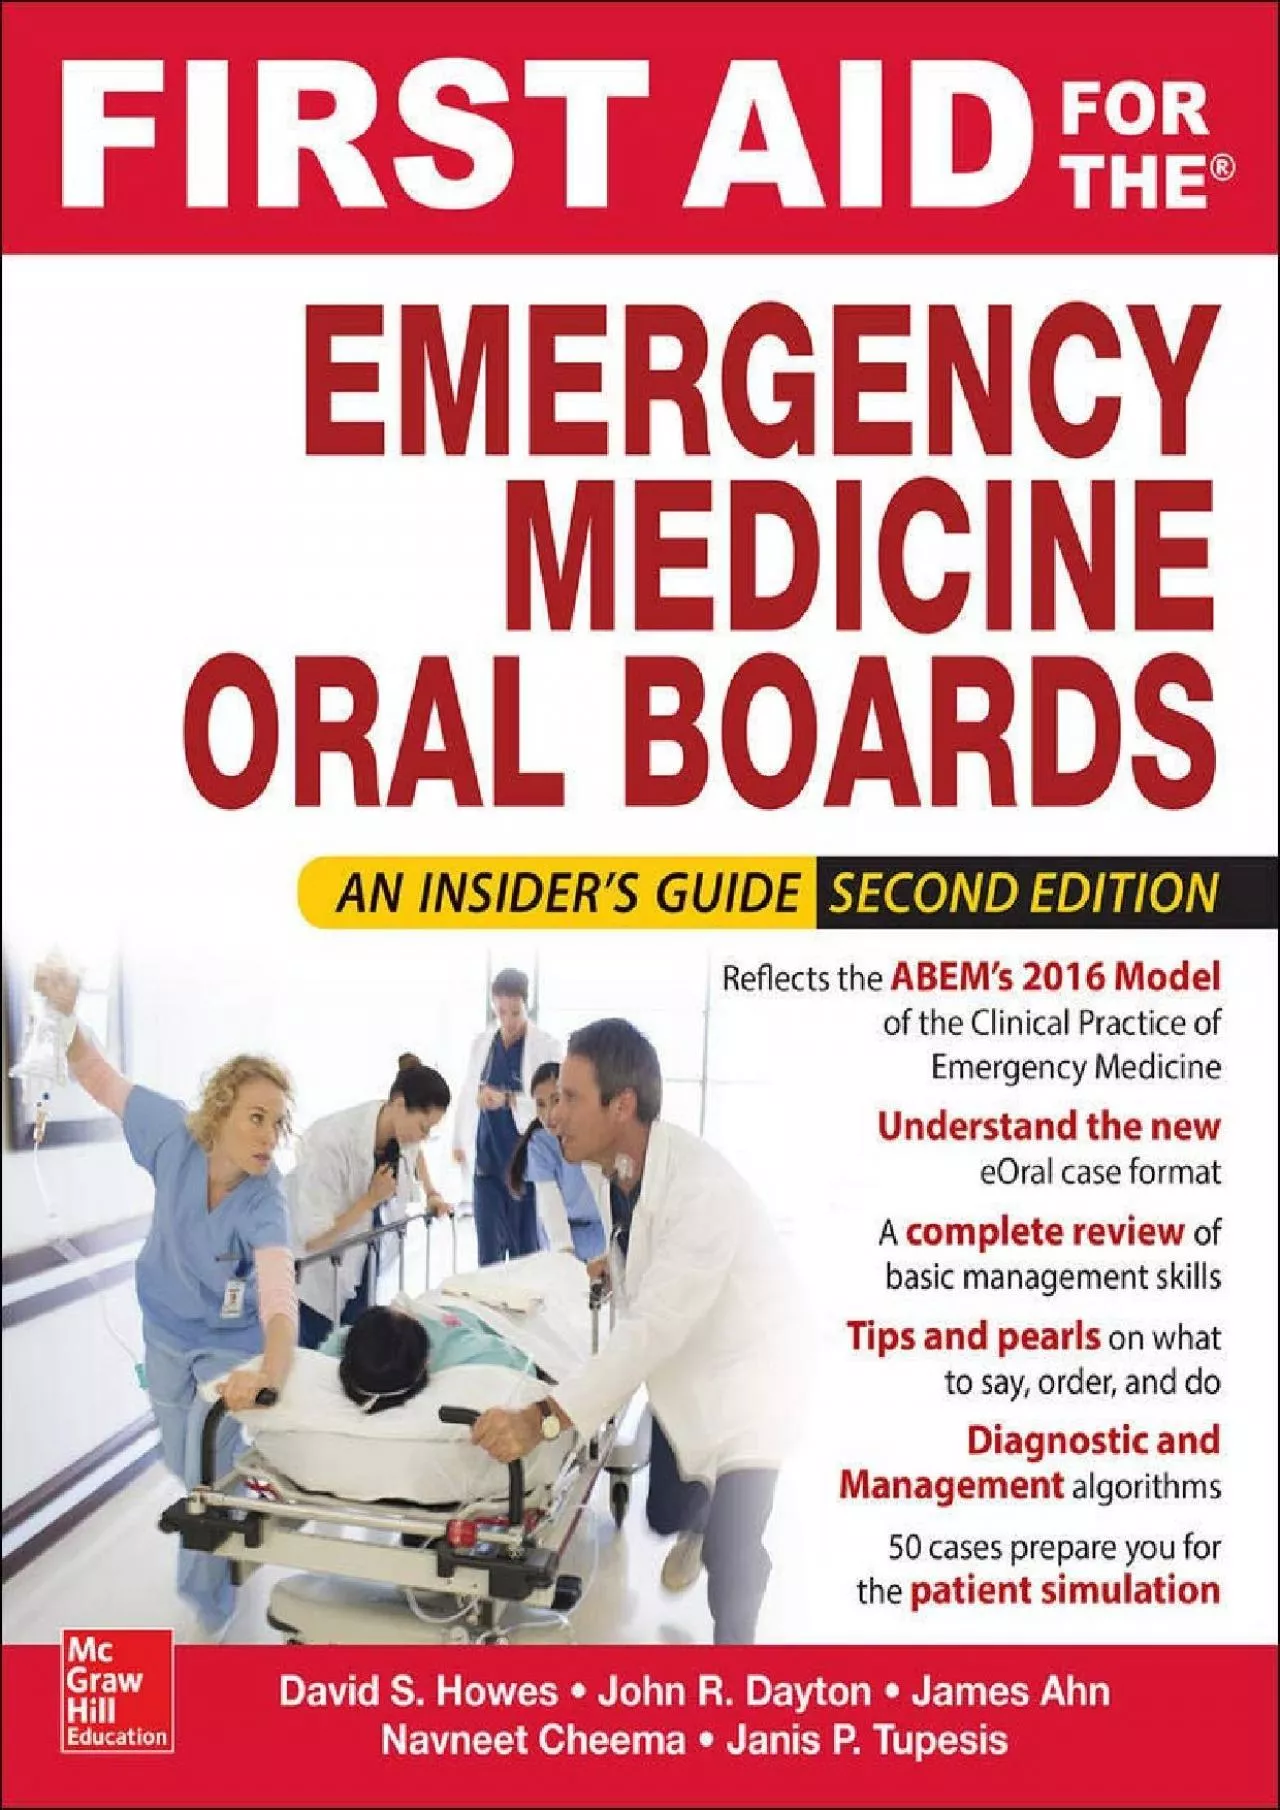 [EBOOK] First Aid for the Emergency Medicine Oral Boards, Second Edition